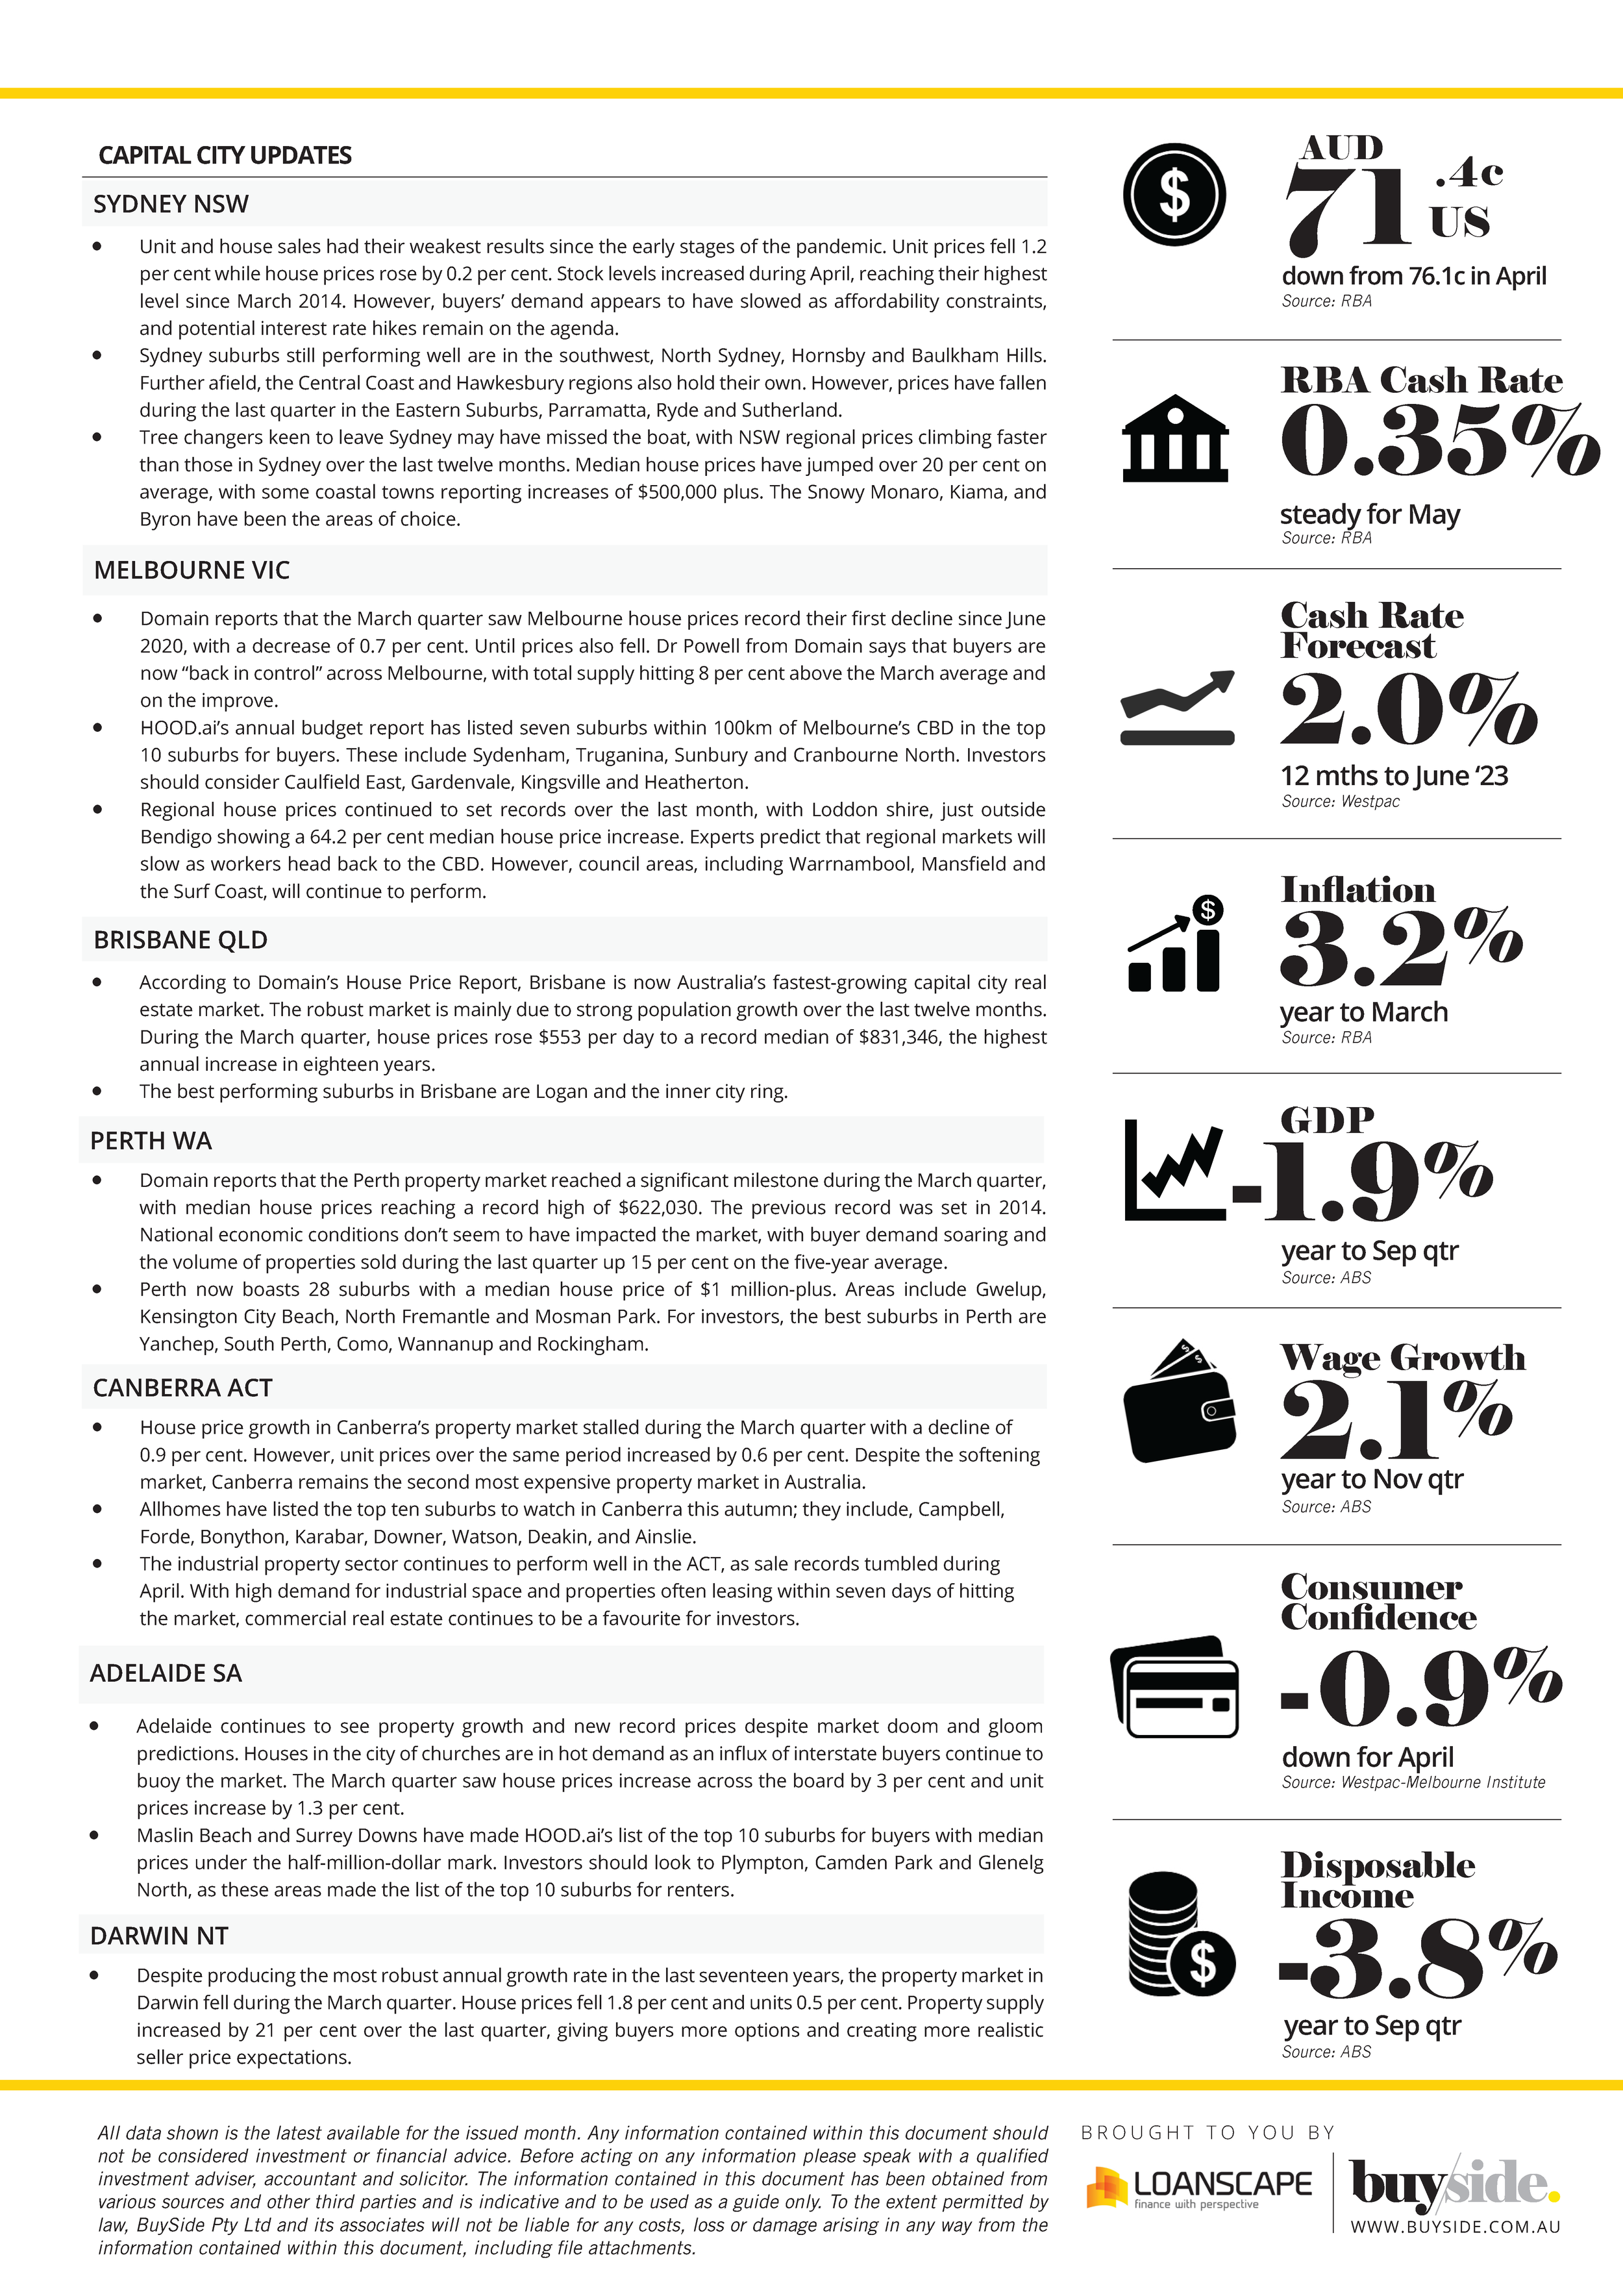 Market Essentials Report_LS_May_2022_Page_2.png